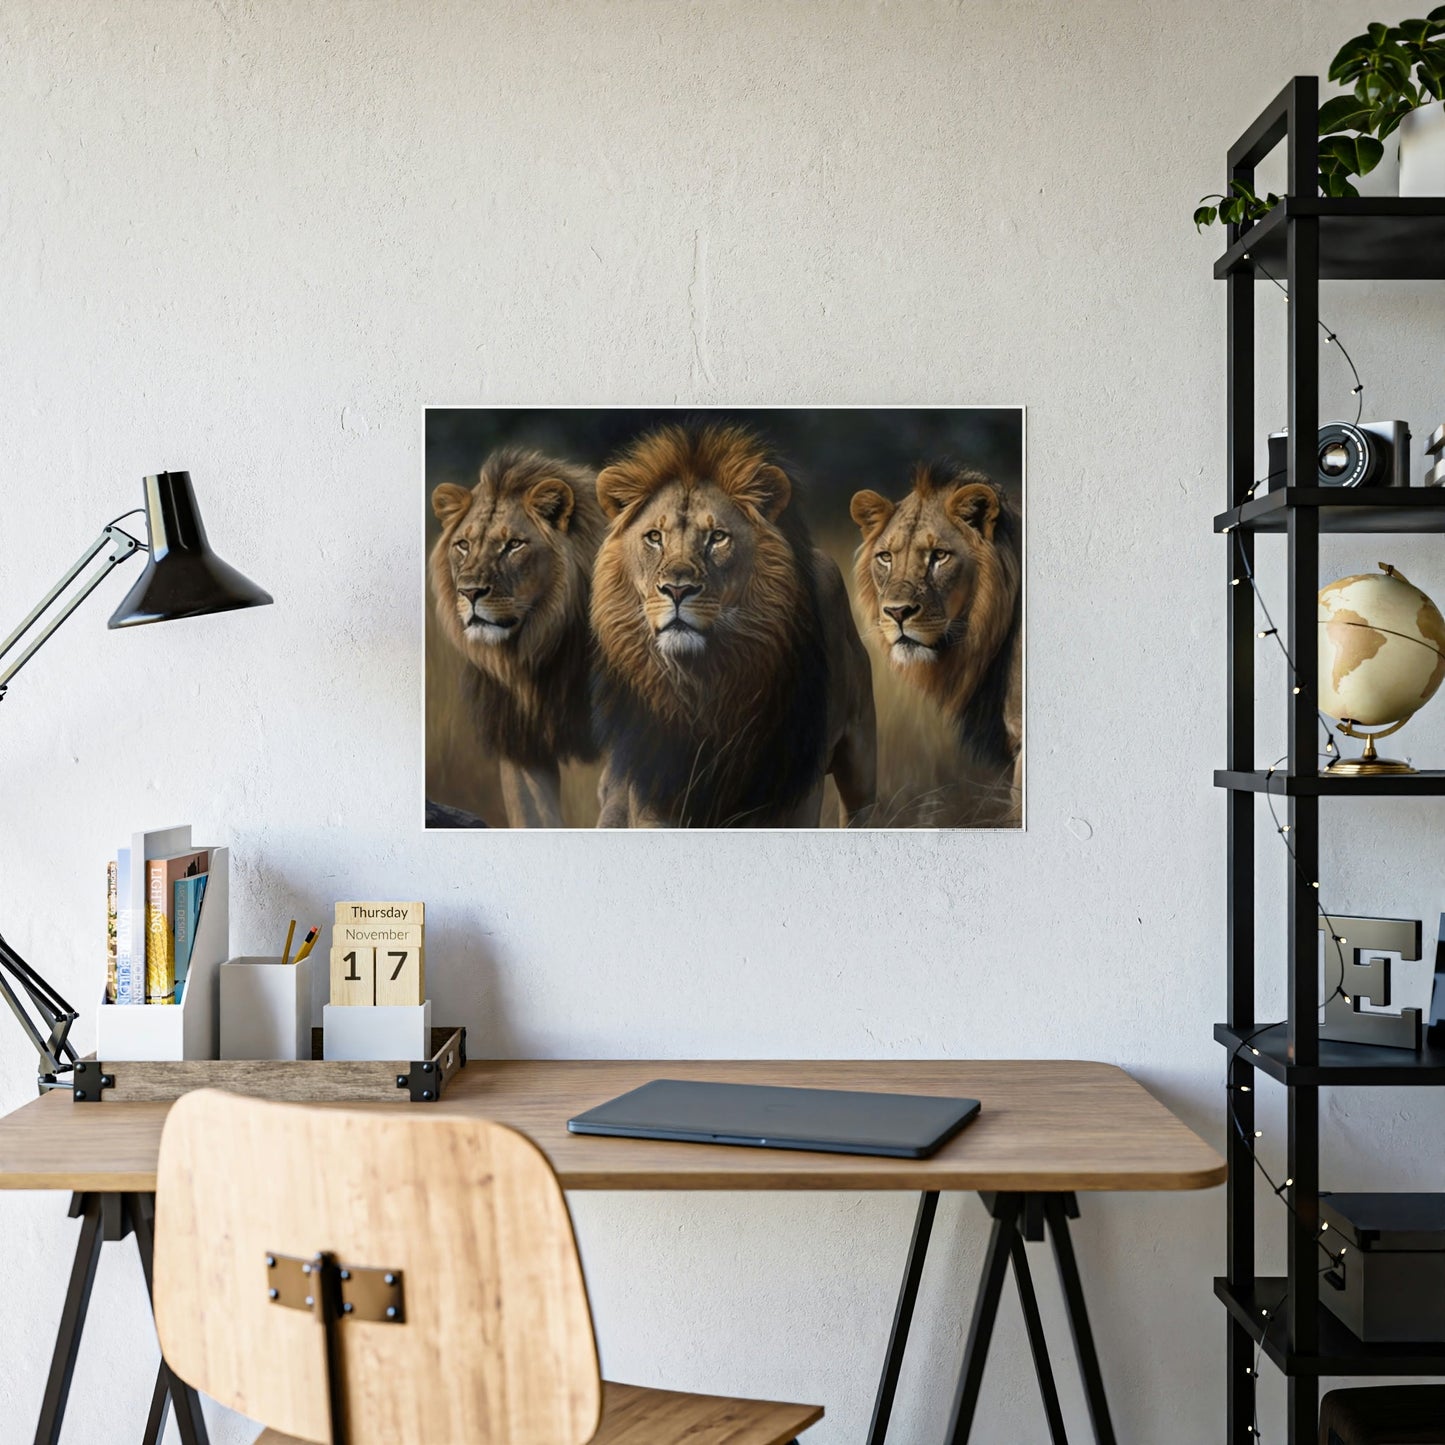 Jungle Royalty: A Canvas of Lions